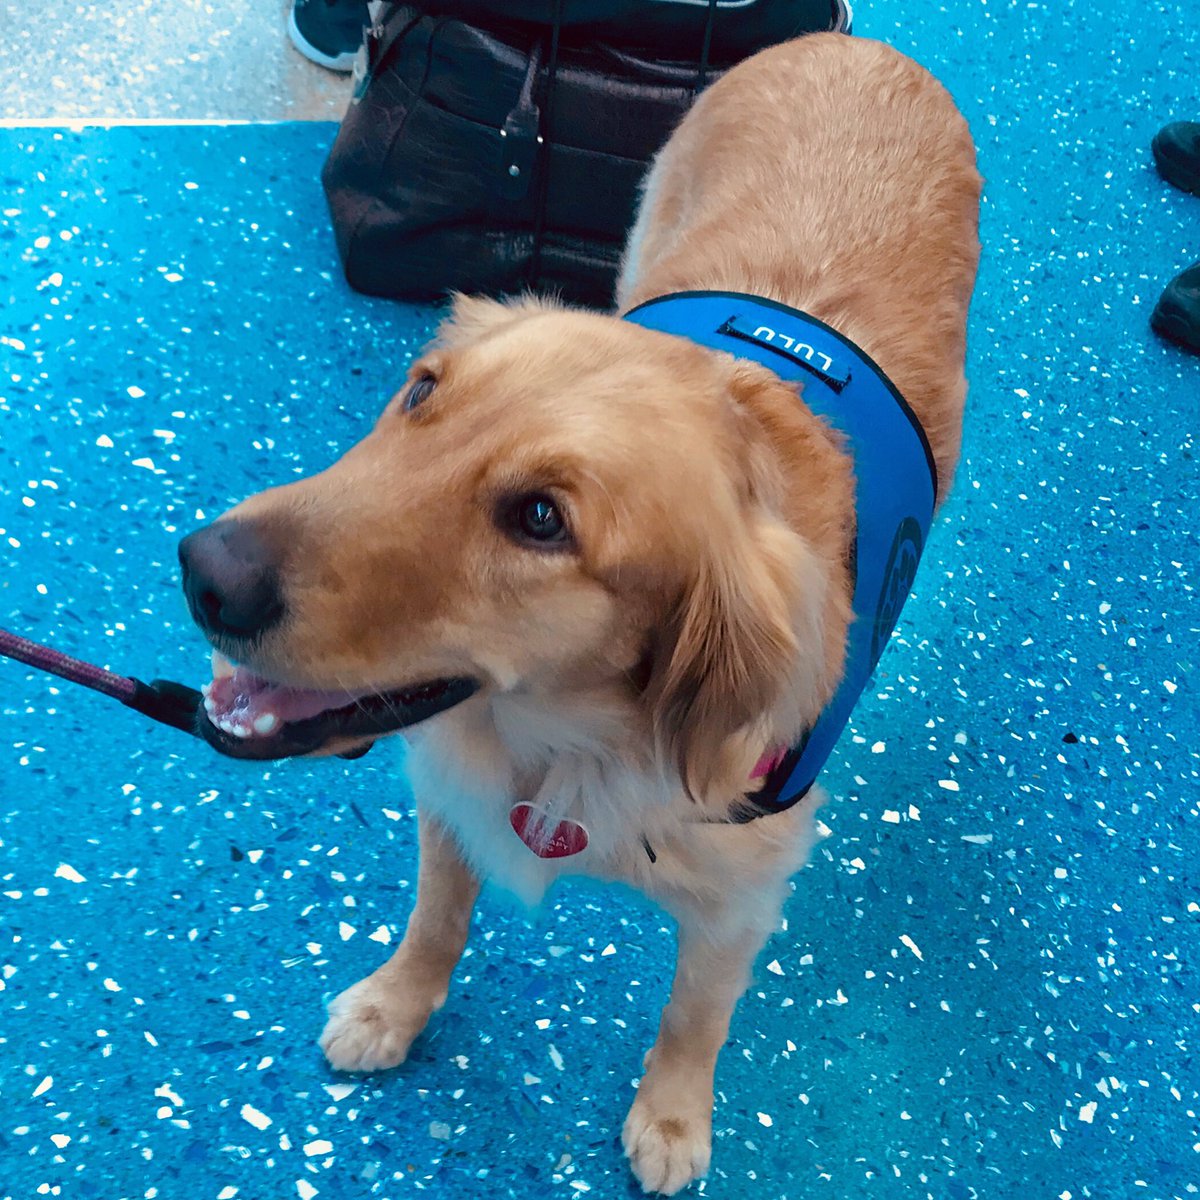 Sweet Lulu greets travelers @JAXairport as part of JAXPAWS 🐾 Luved getting some #puppylove pre-boarding! #comfortdogs #therapydogs #welcomewagging